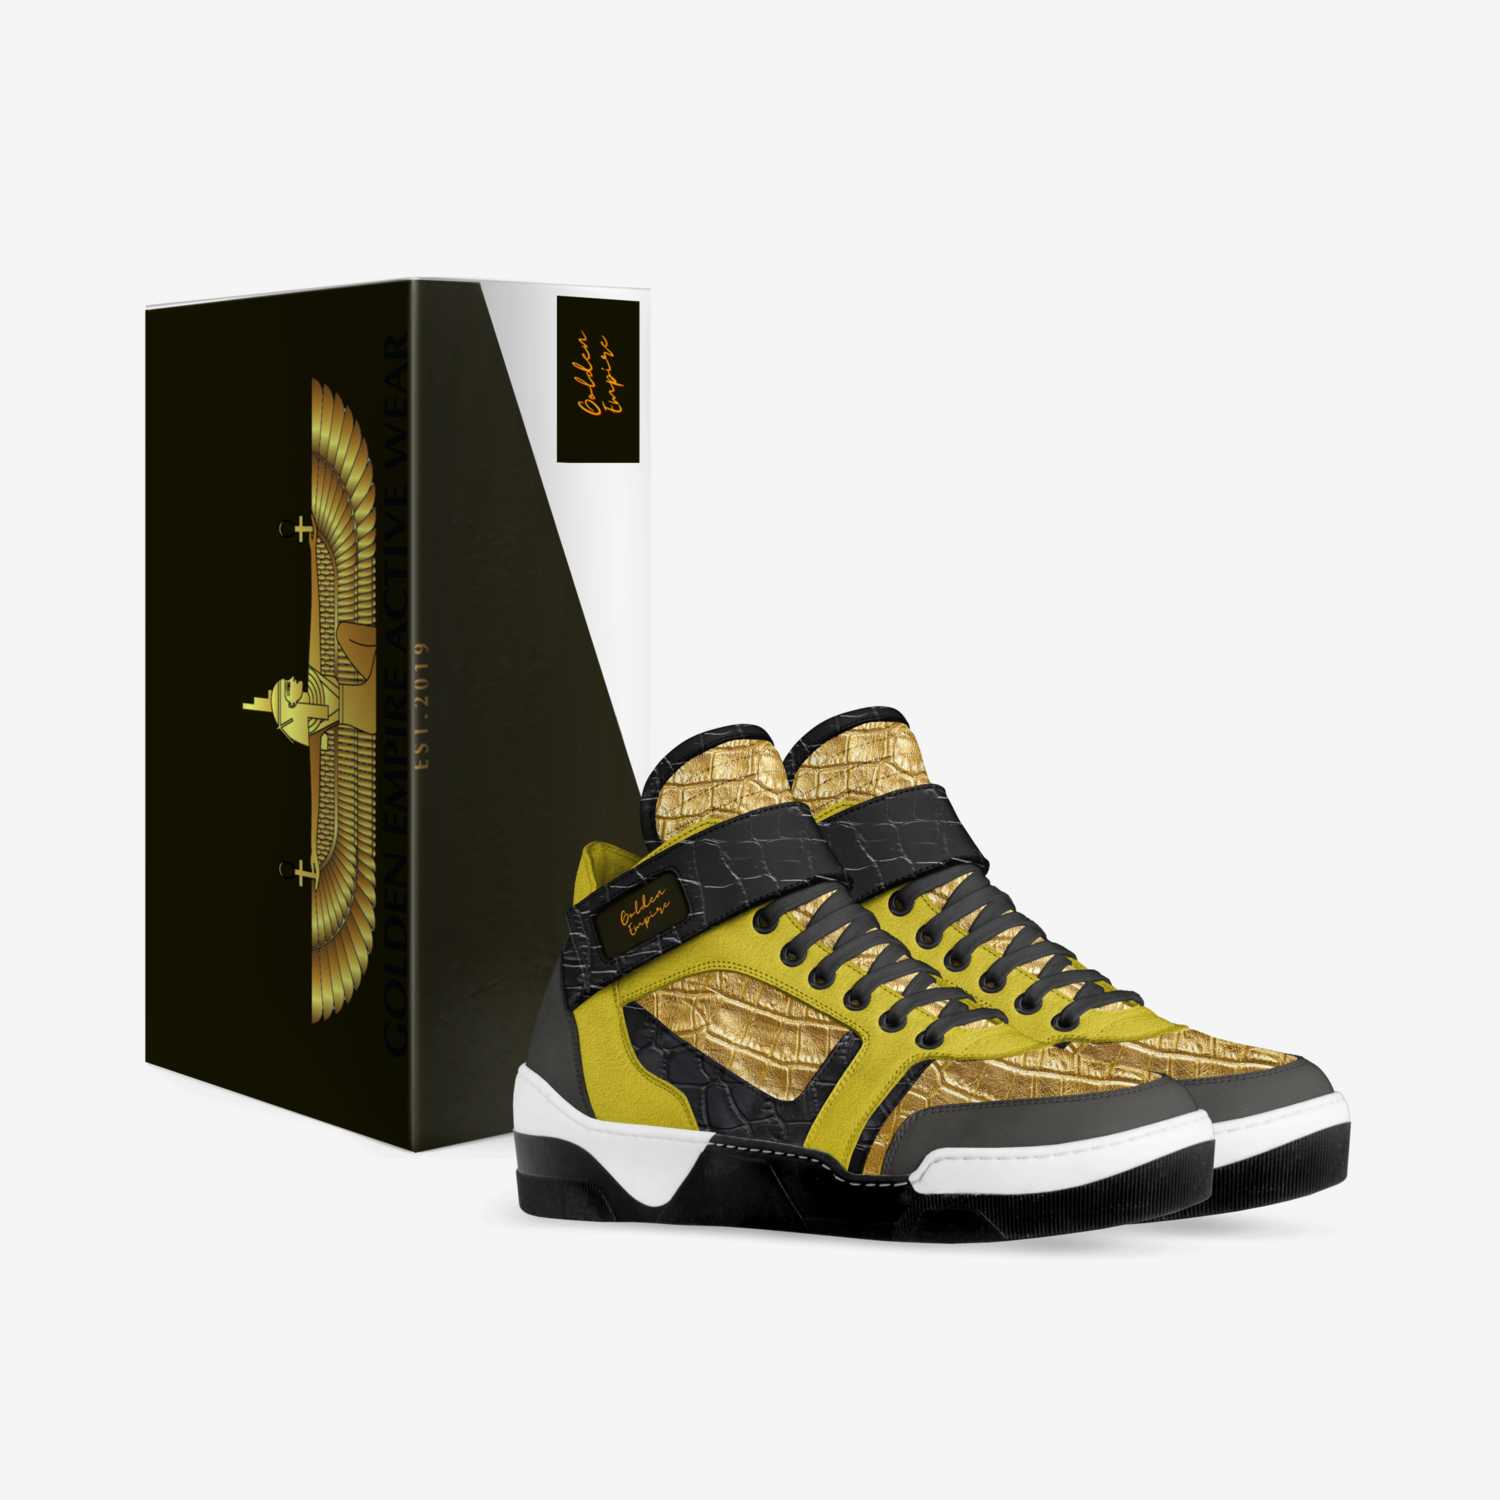 Golden Empire custom made in Italy shoes by Golden Empire Active Wear | Box view